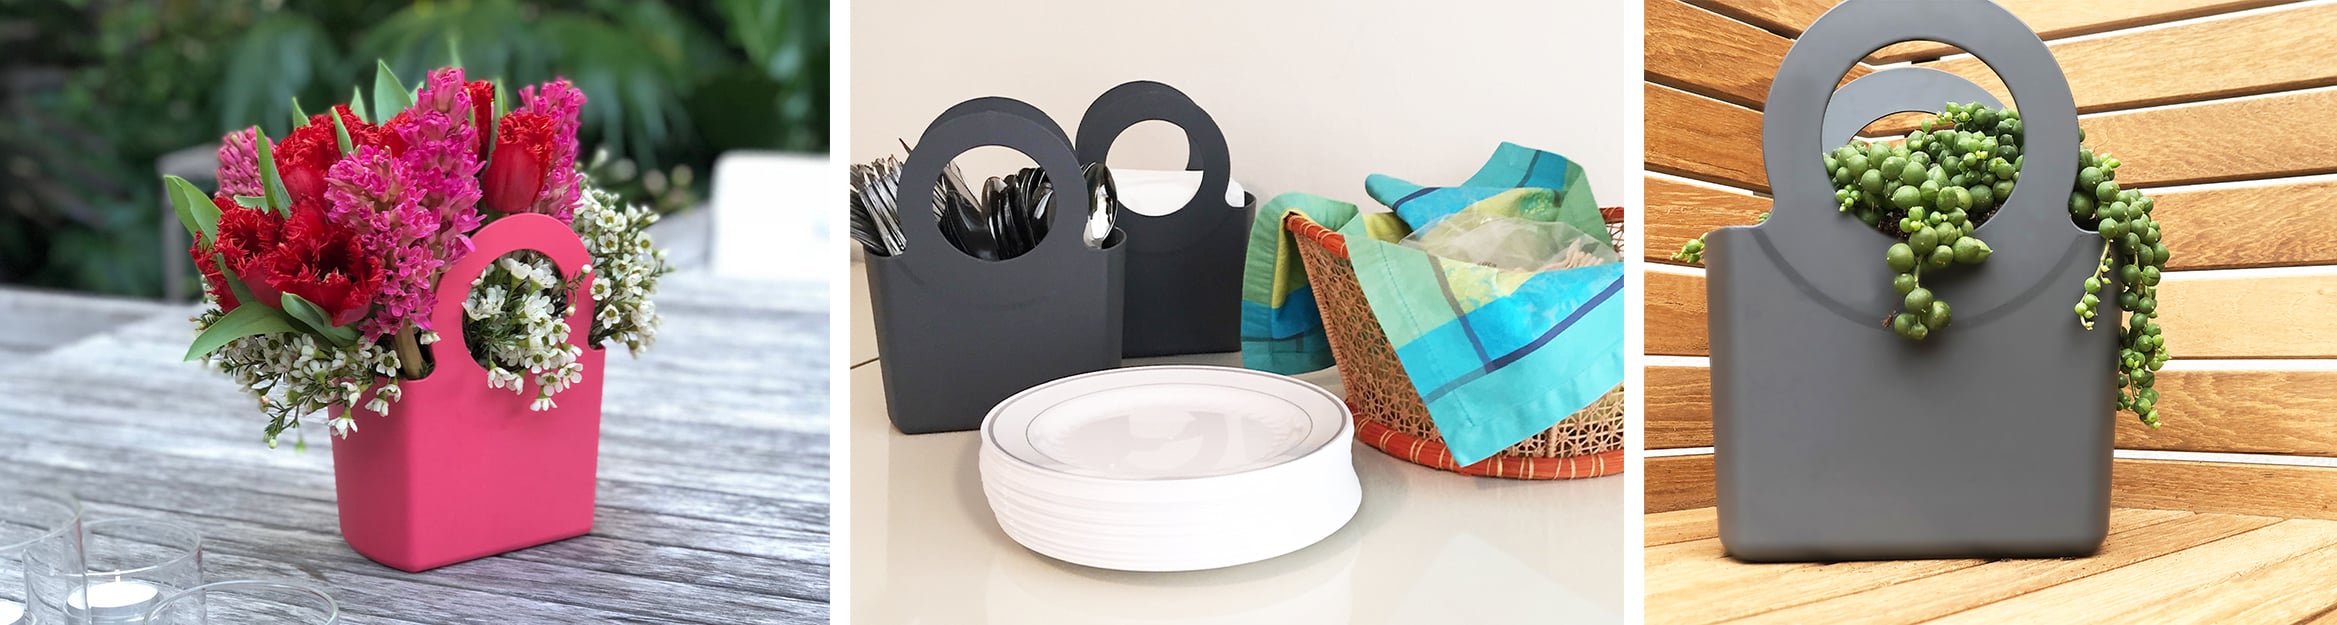 Gabrielle Bags Do It All - Picnic, Cutlery, Plant Container